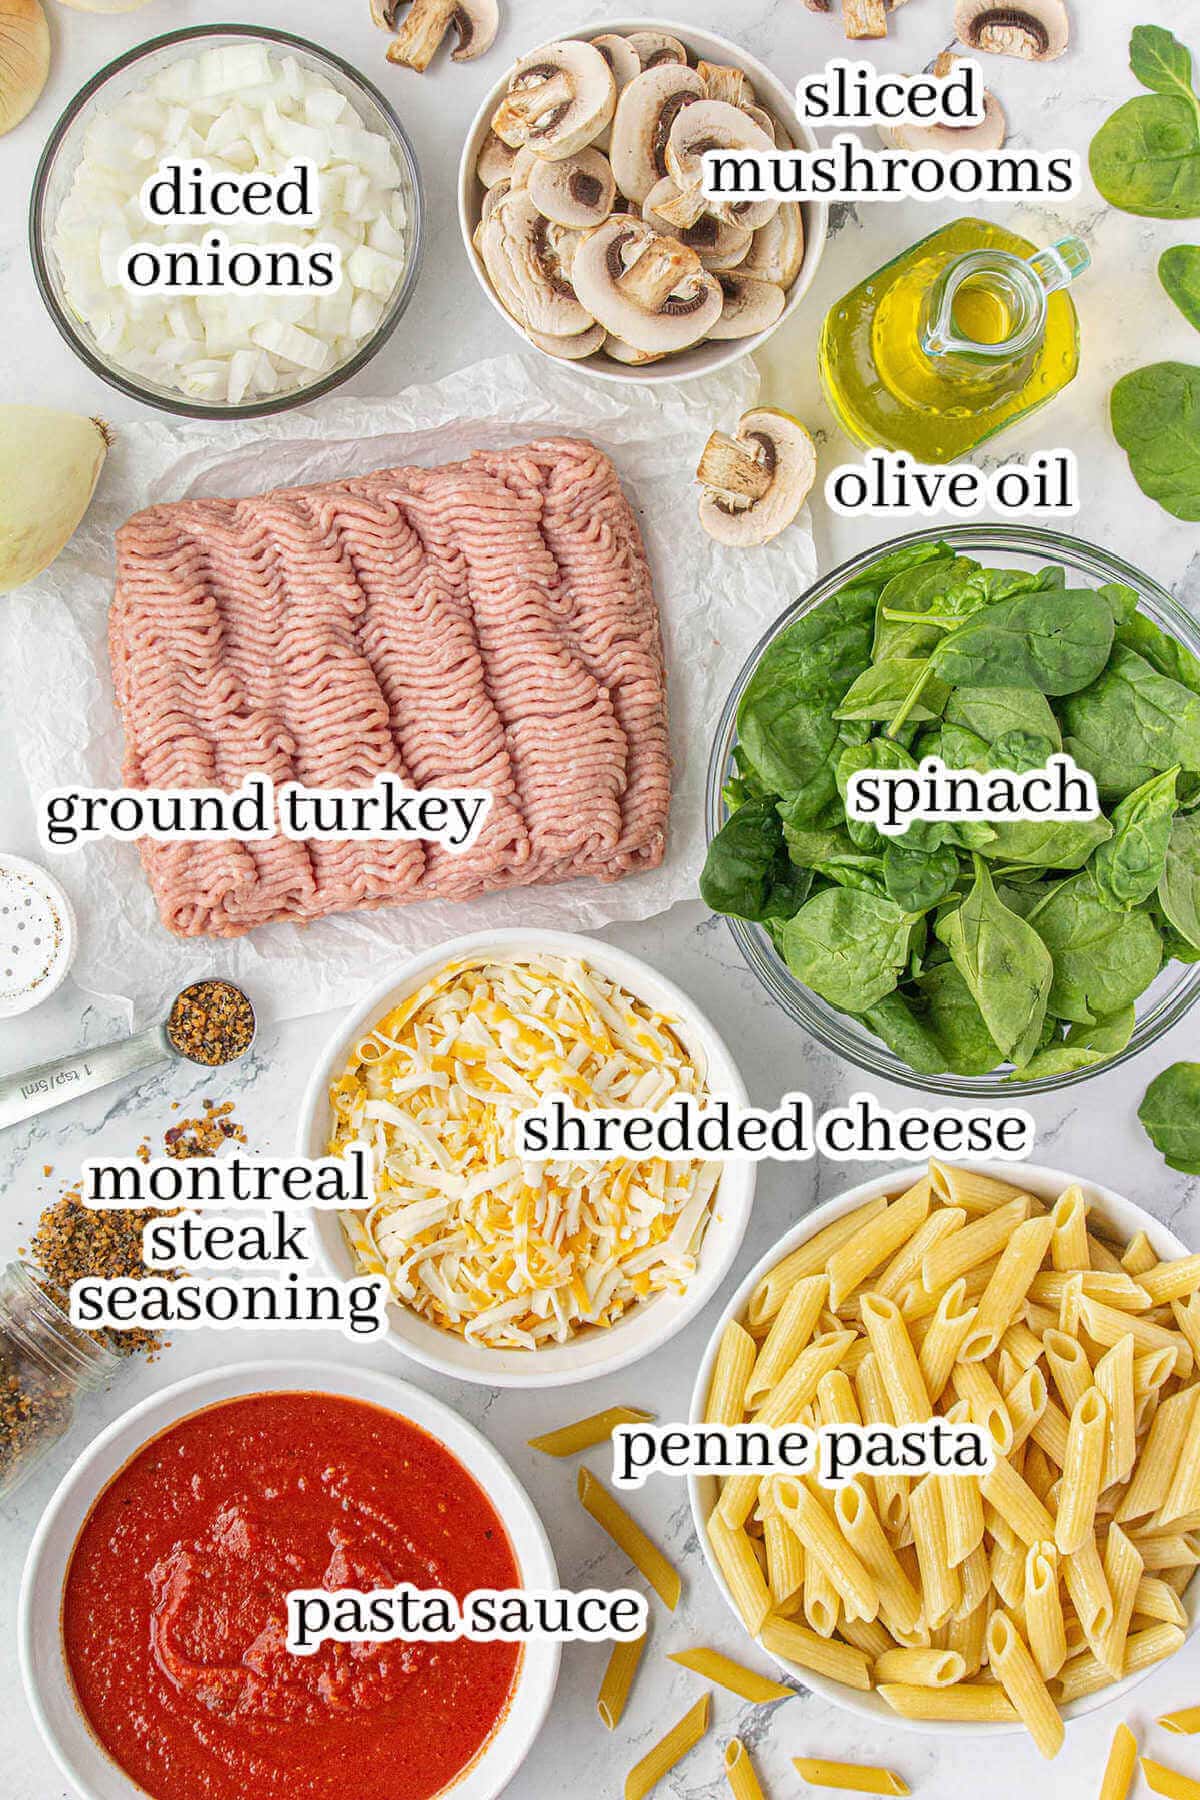 Ingredients to make pasta bake, with print overlay.